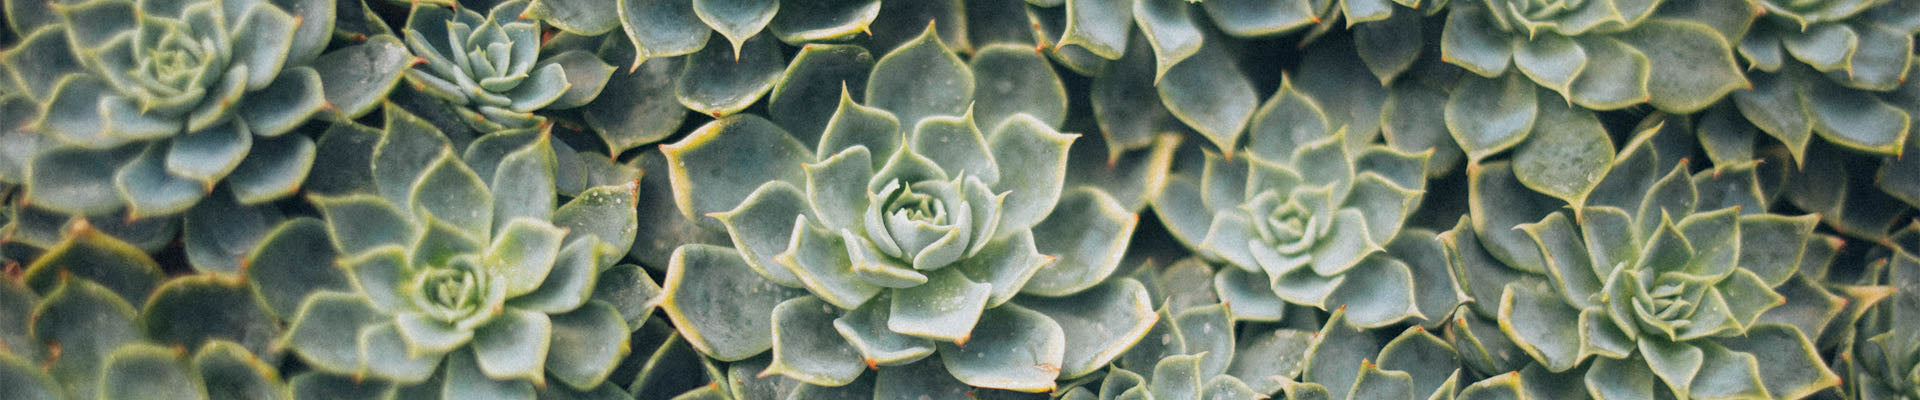 The Resilient World of Succulents and Cacti: Lessons in Healing, Symbiosis, and Conservation